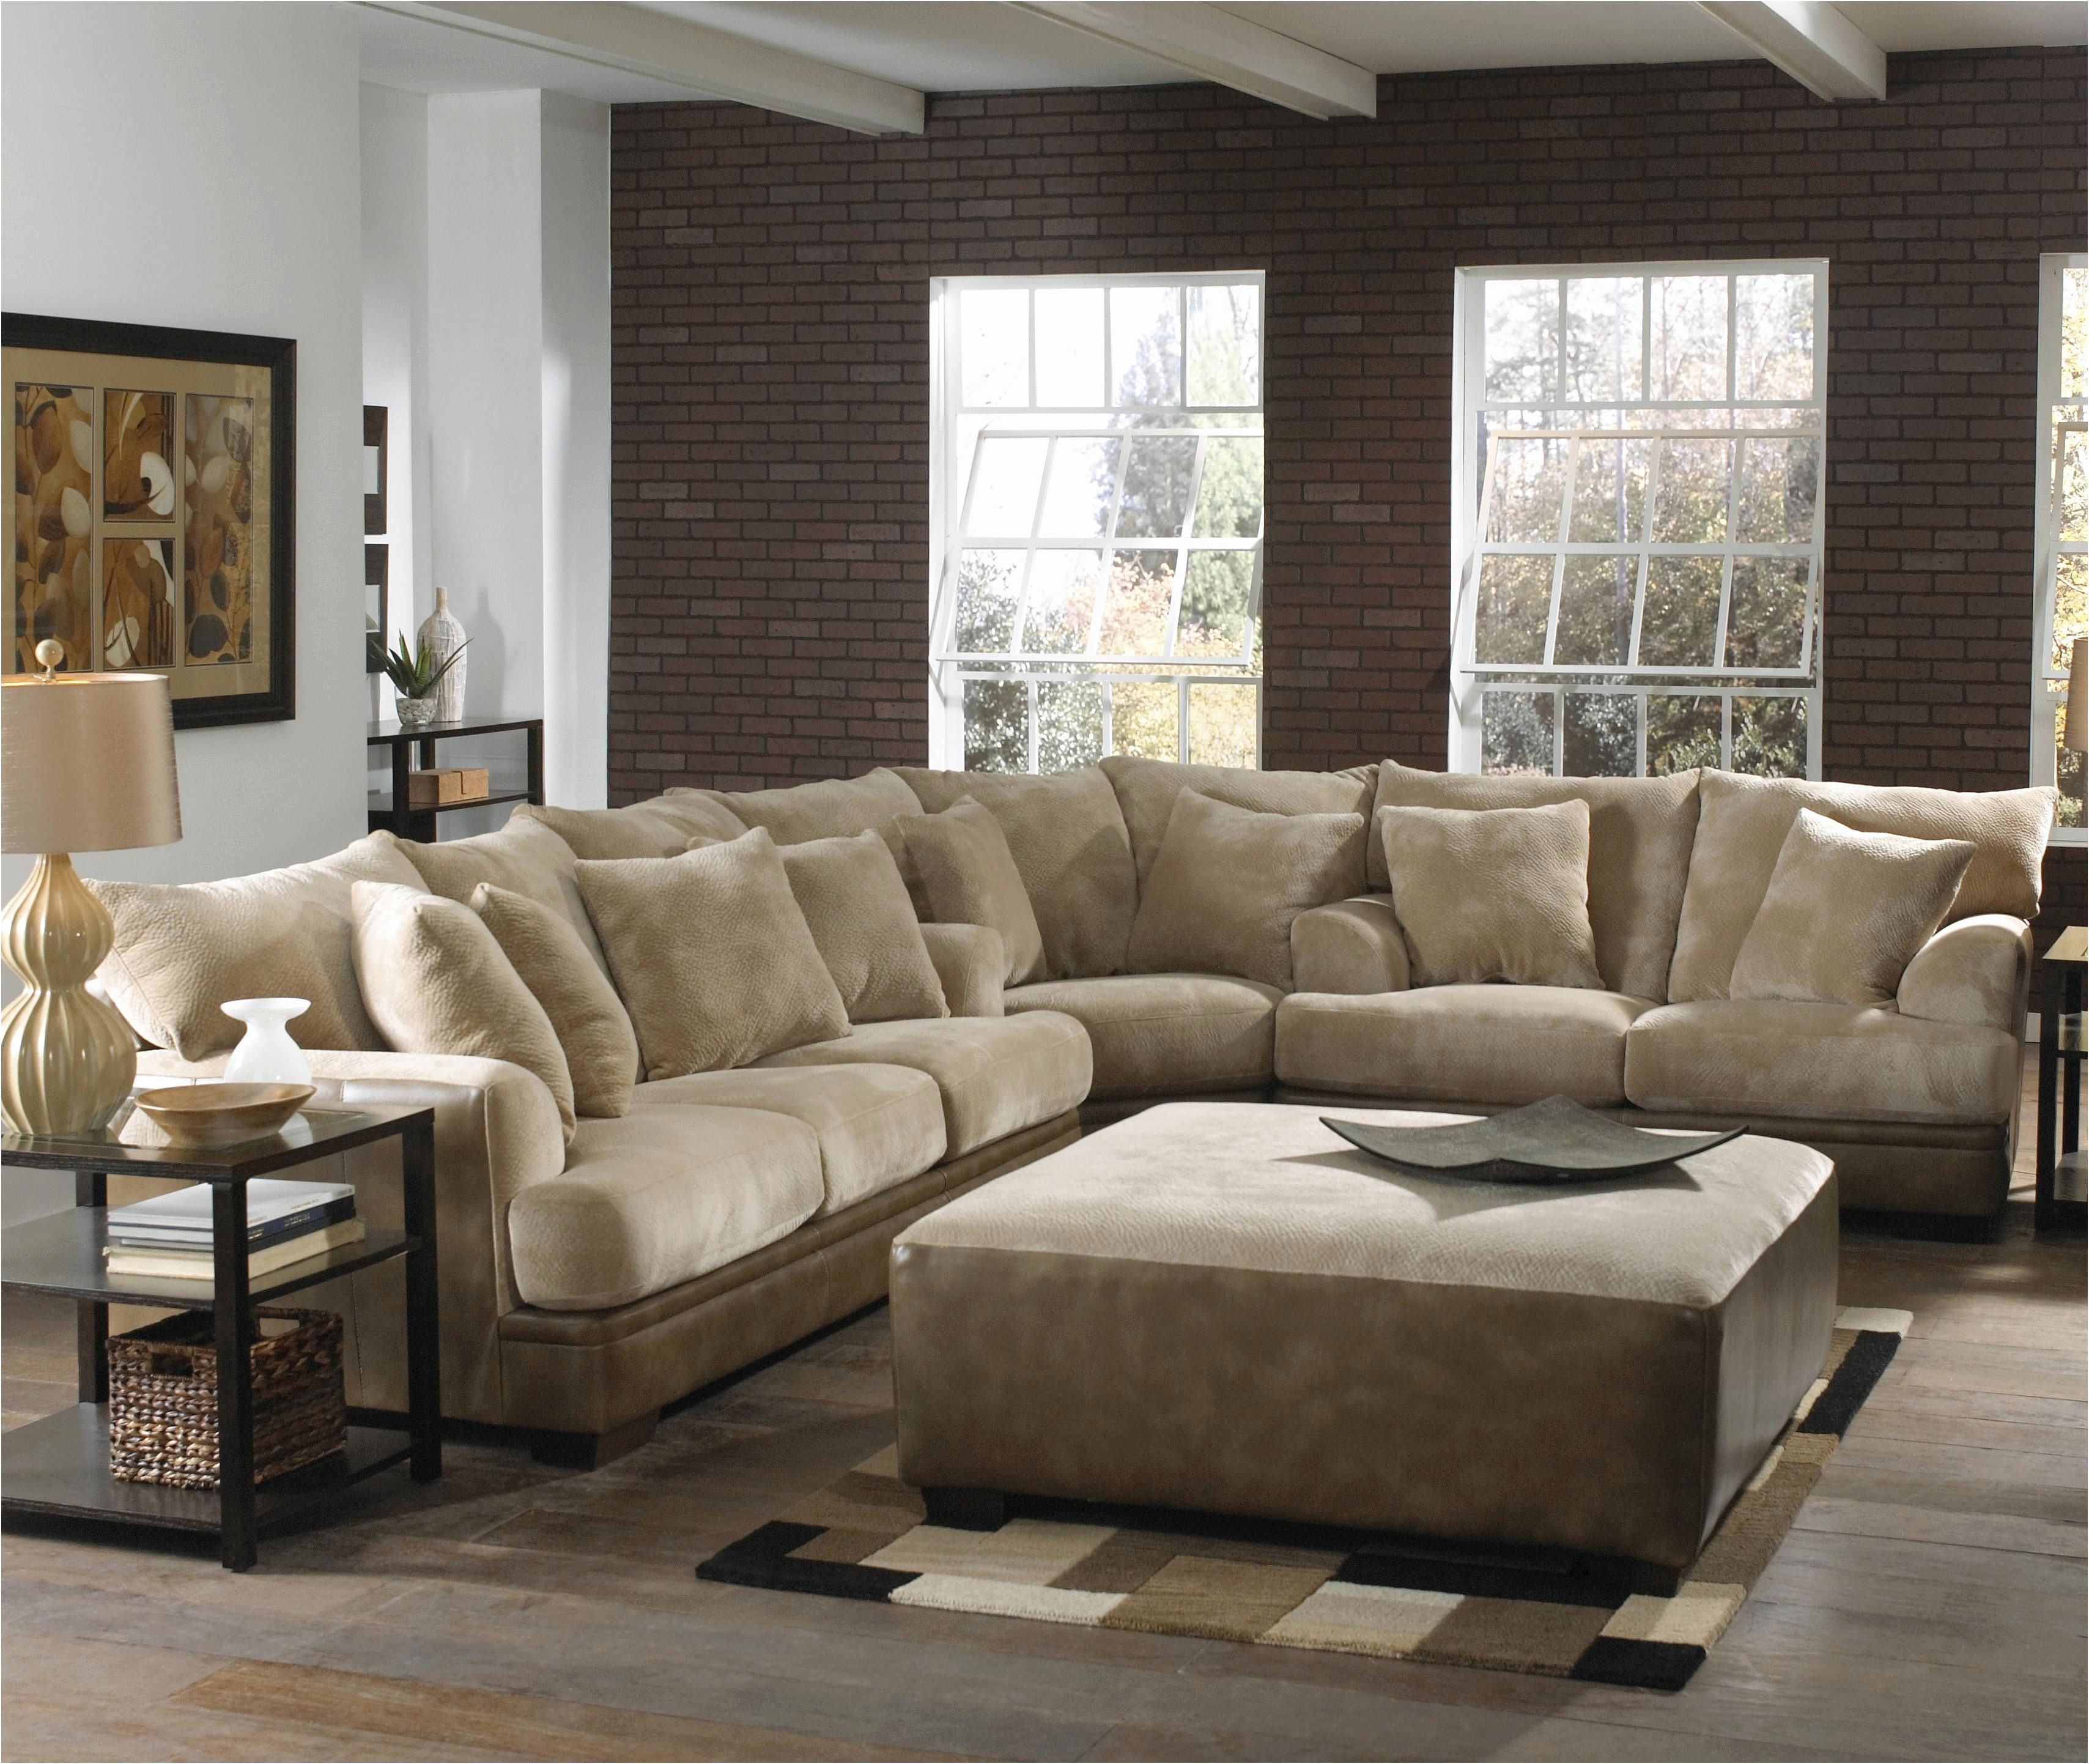 Sofa Right Sectional Braxton Java Arm Facing Hand Pb Basic Chaise In Newest Regina Sectional Sofas (View 20 of 20)